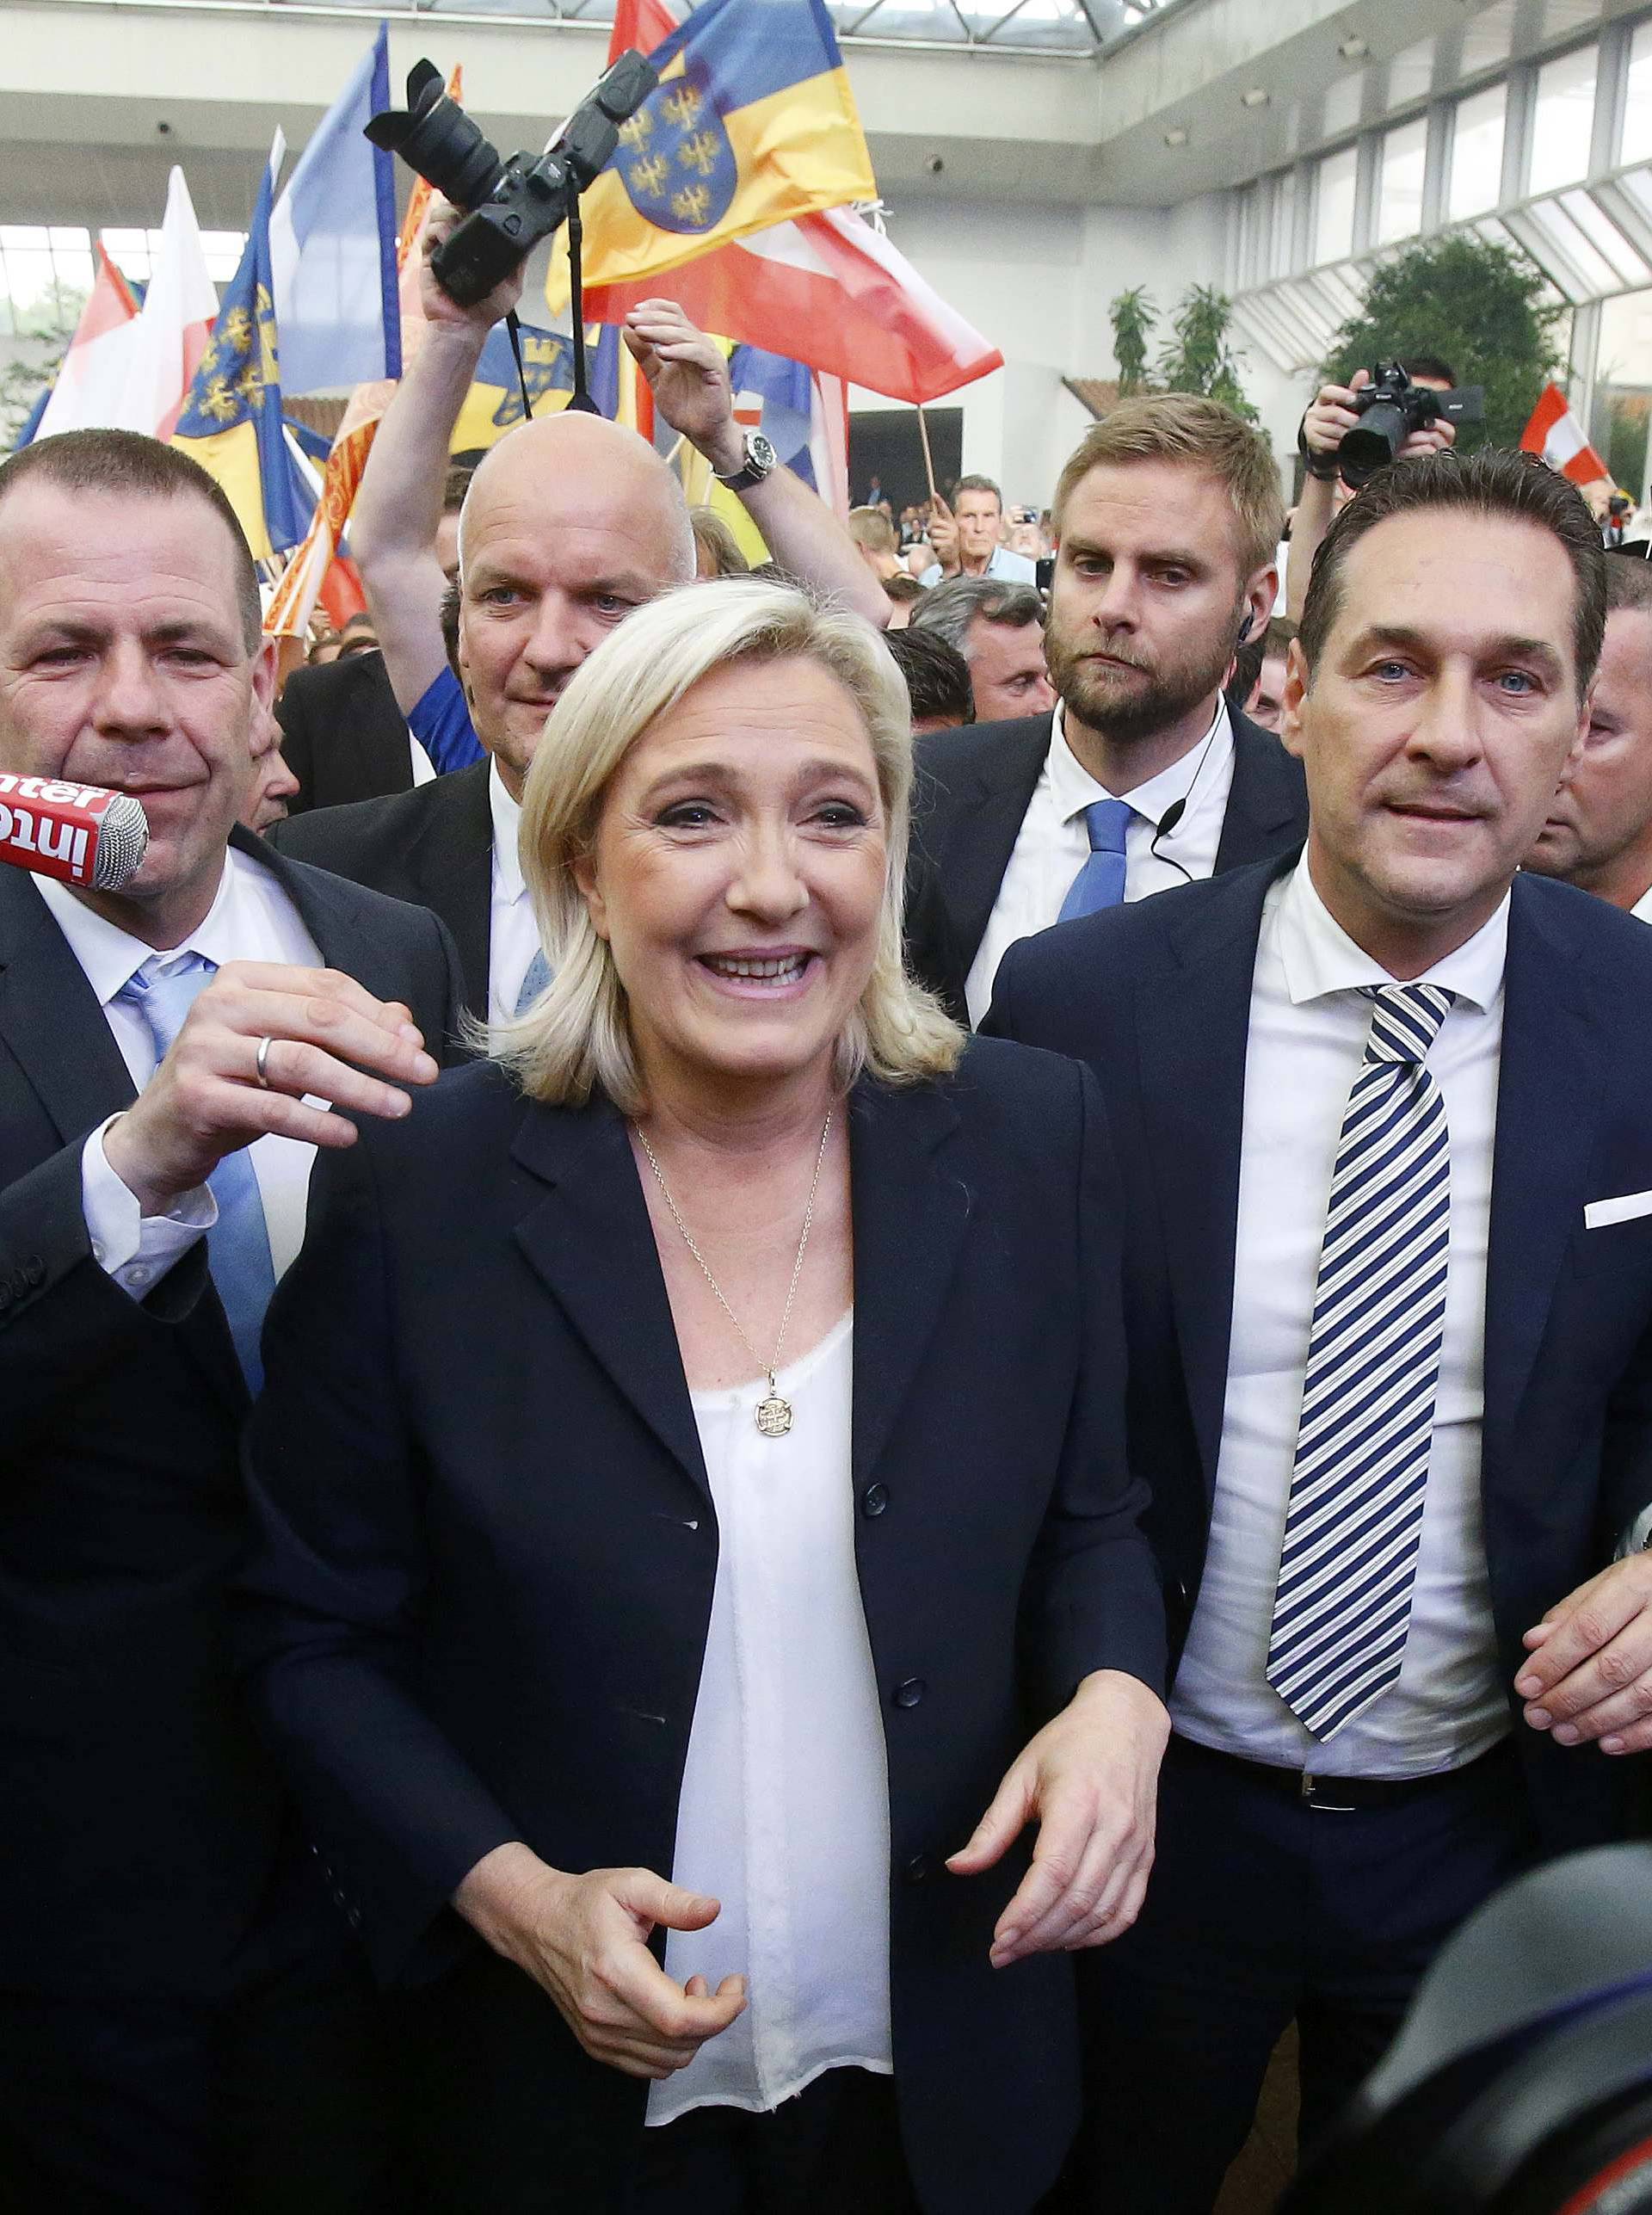 France's far right National Front political party leader Le Pen and Austrian far right FPOe leader Strache arrive at the "Public Meeting on Patriotic Spring" in Vienna